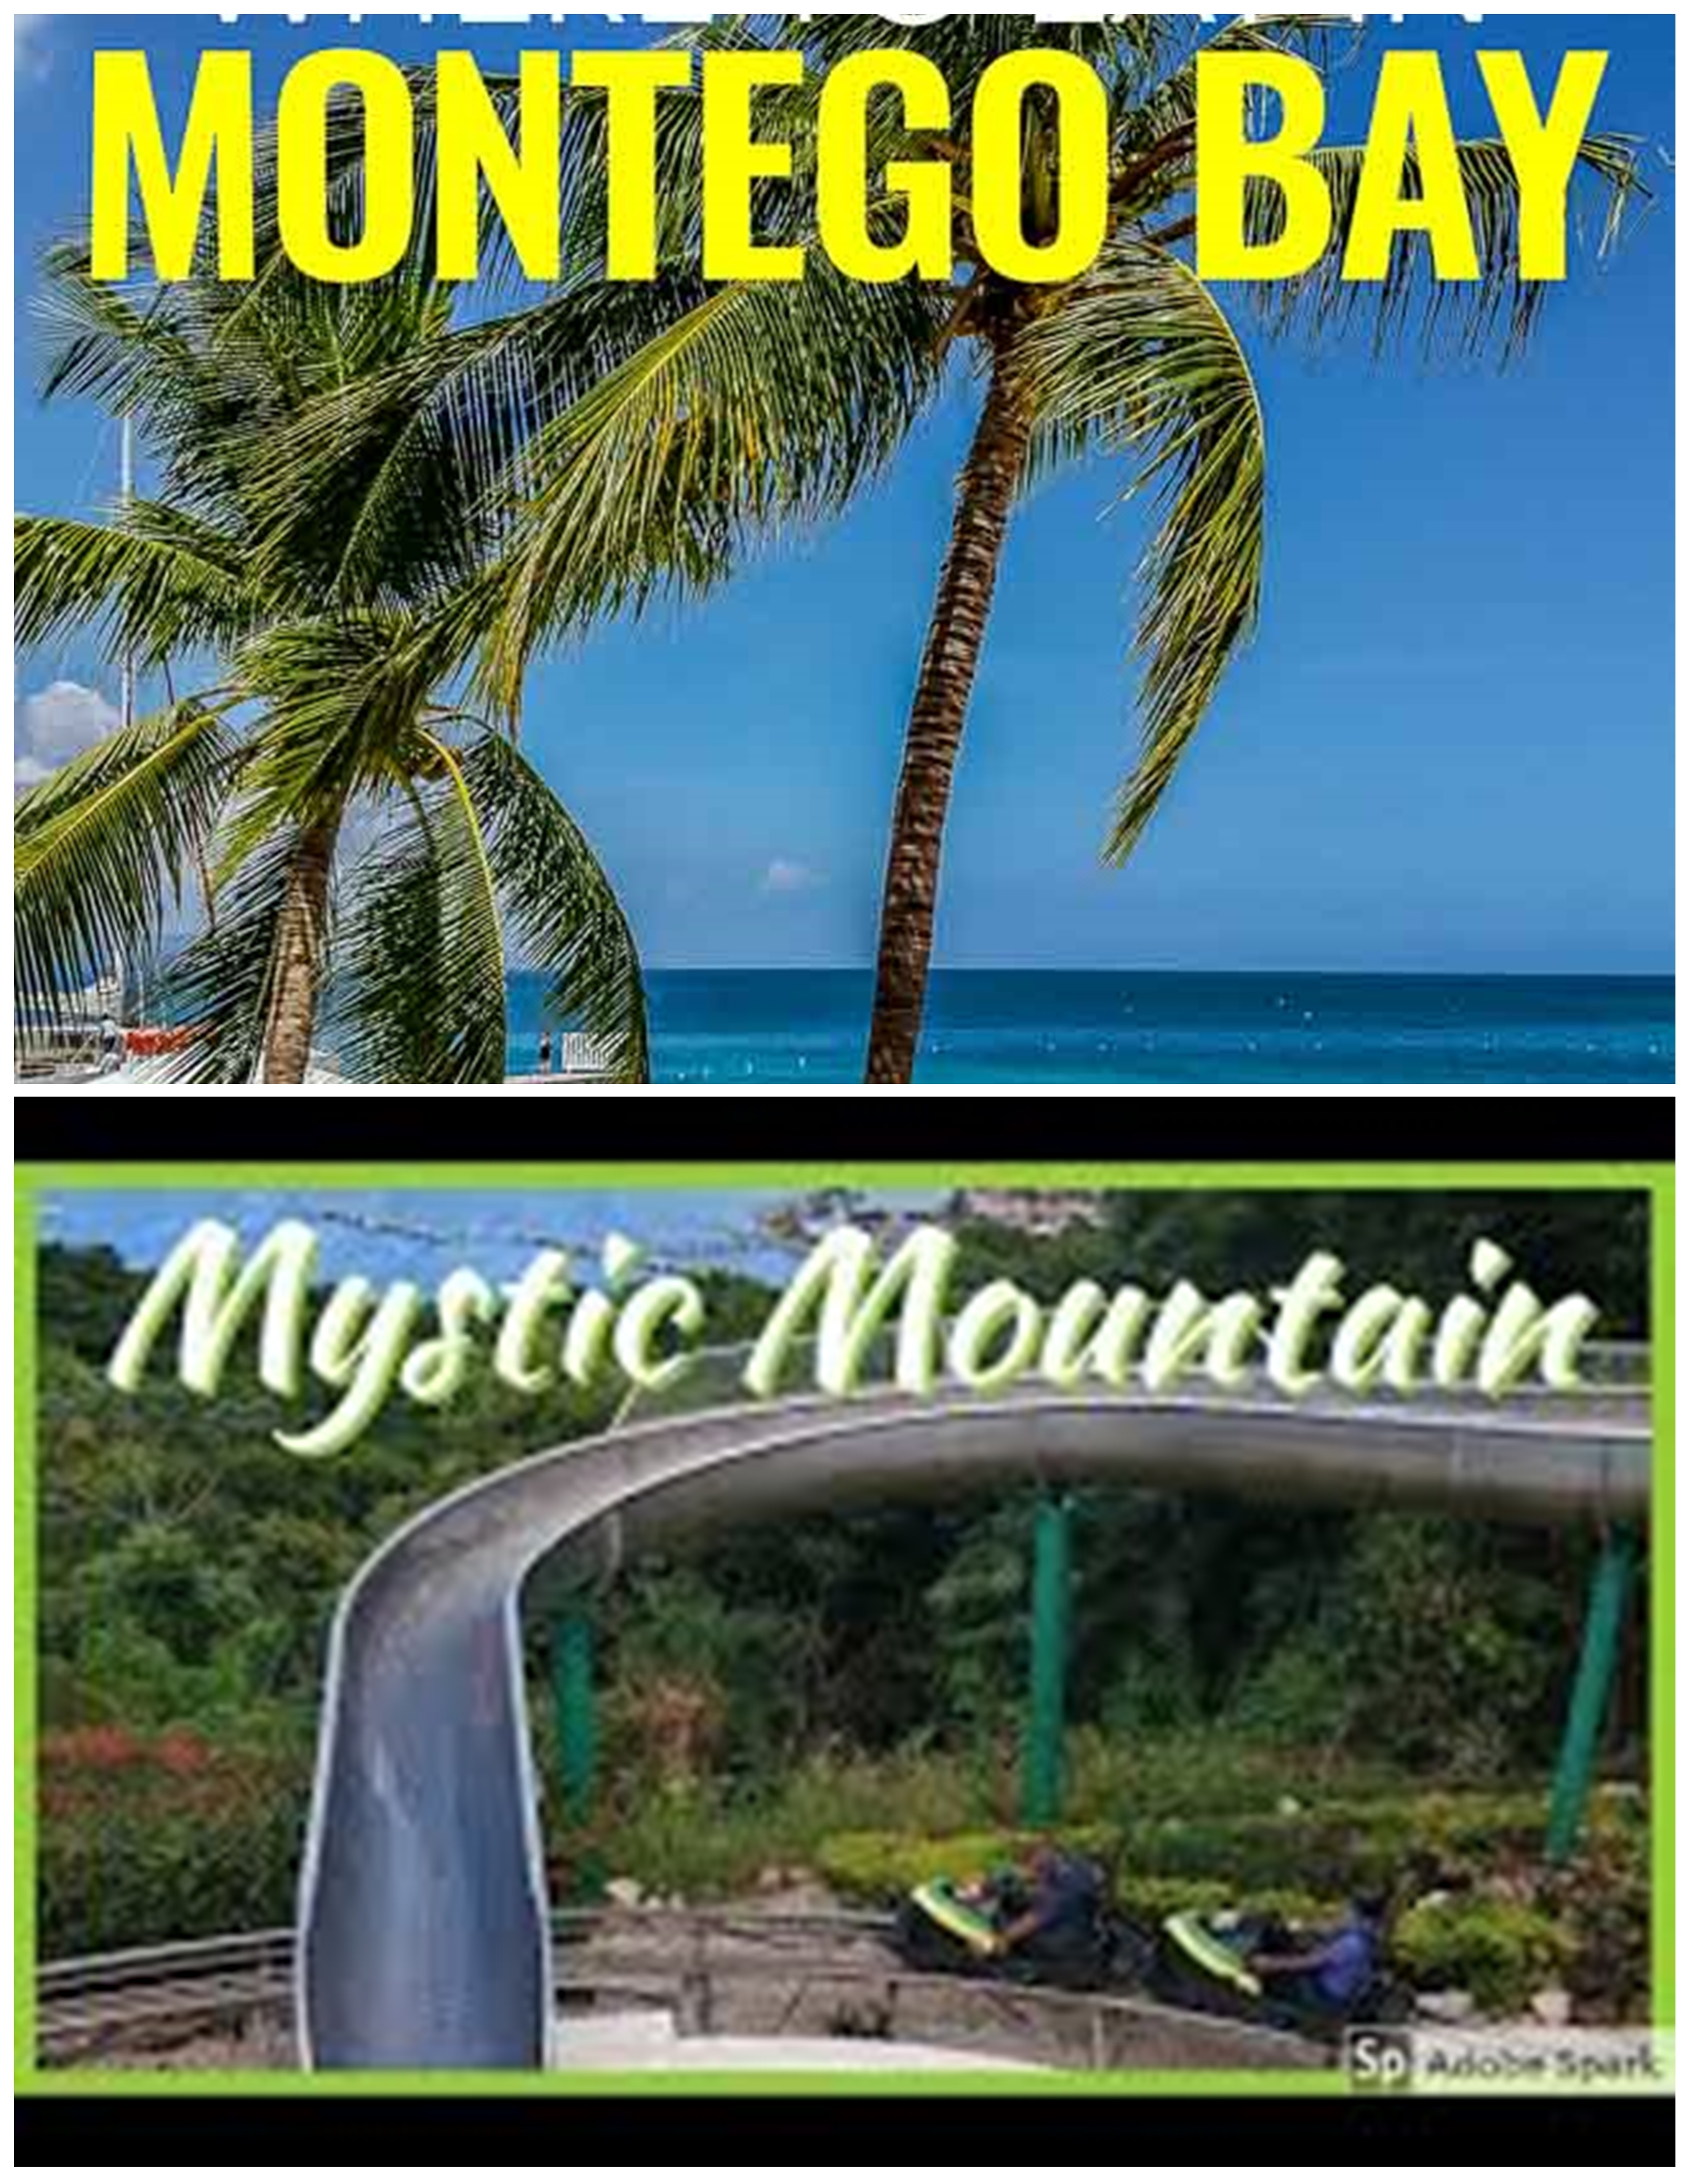 From Montego bay North Course Hwy Area - Mystic Mountain ( Round Trip)